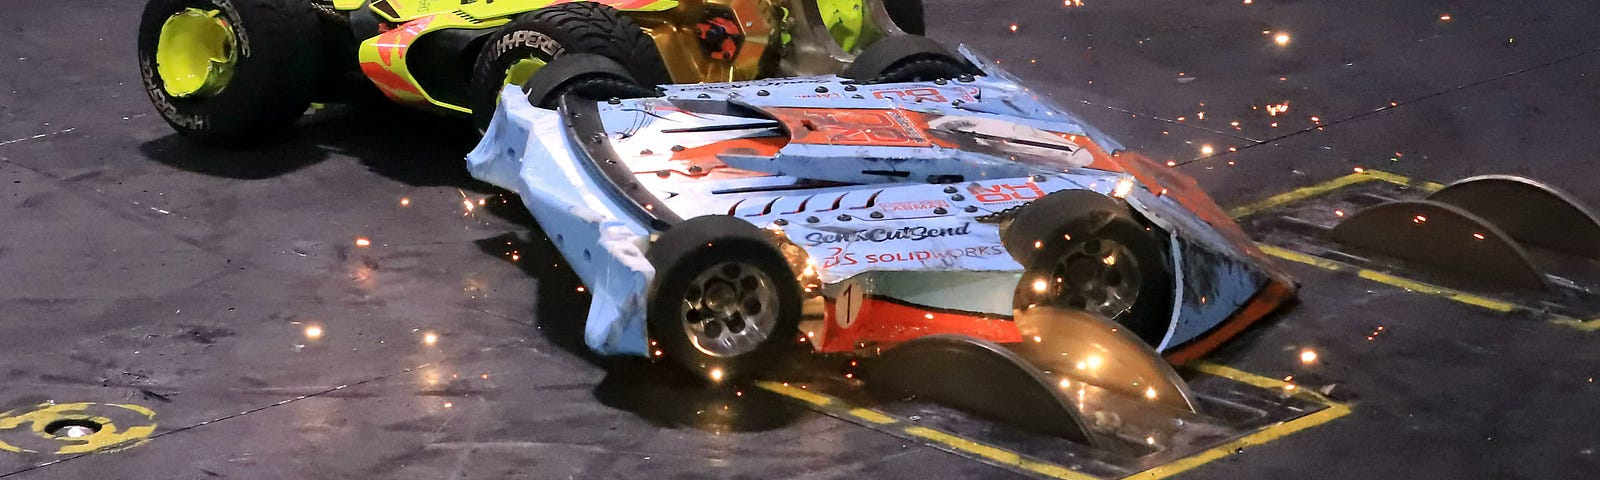 A still image from BattleBots 2022 Championship: HyperShock vs P1. HyperShock sports florescent yellow plastic armor and a duel toothed disk spinner in front. P1 is has a blue and orange paint job reminiscent of a formula 1 race car. It feature a flipper that pivots near it’s front edge. In the image, HyperShock is ramming P1 into two kill saws that have popped up from two slits in the floor.